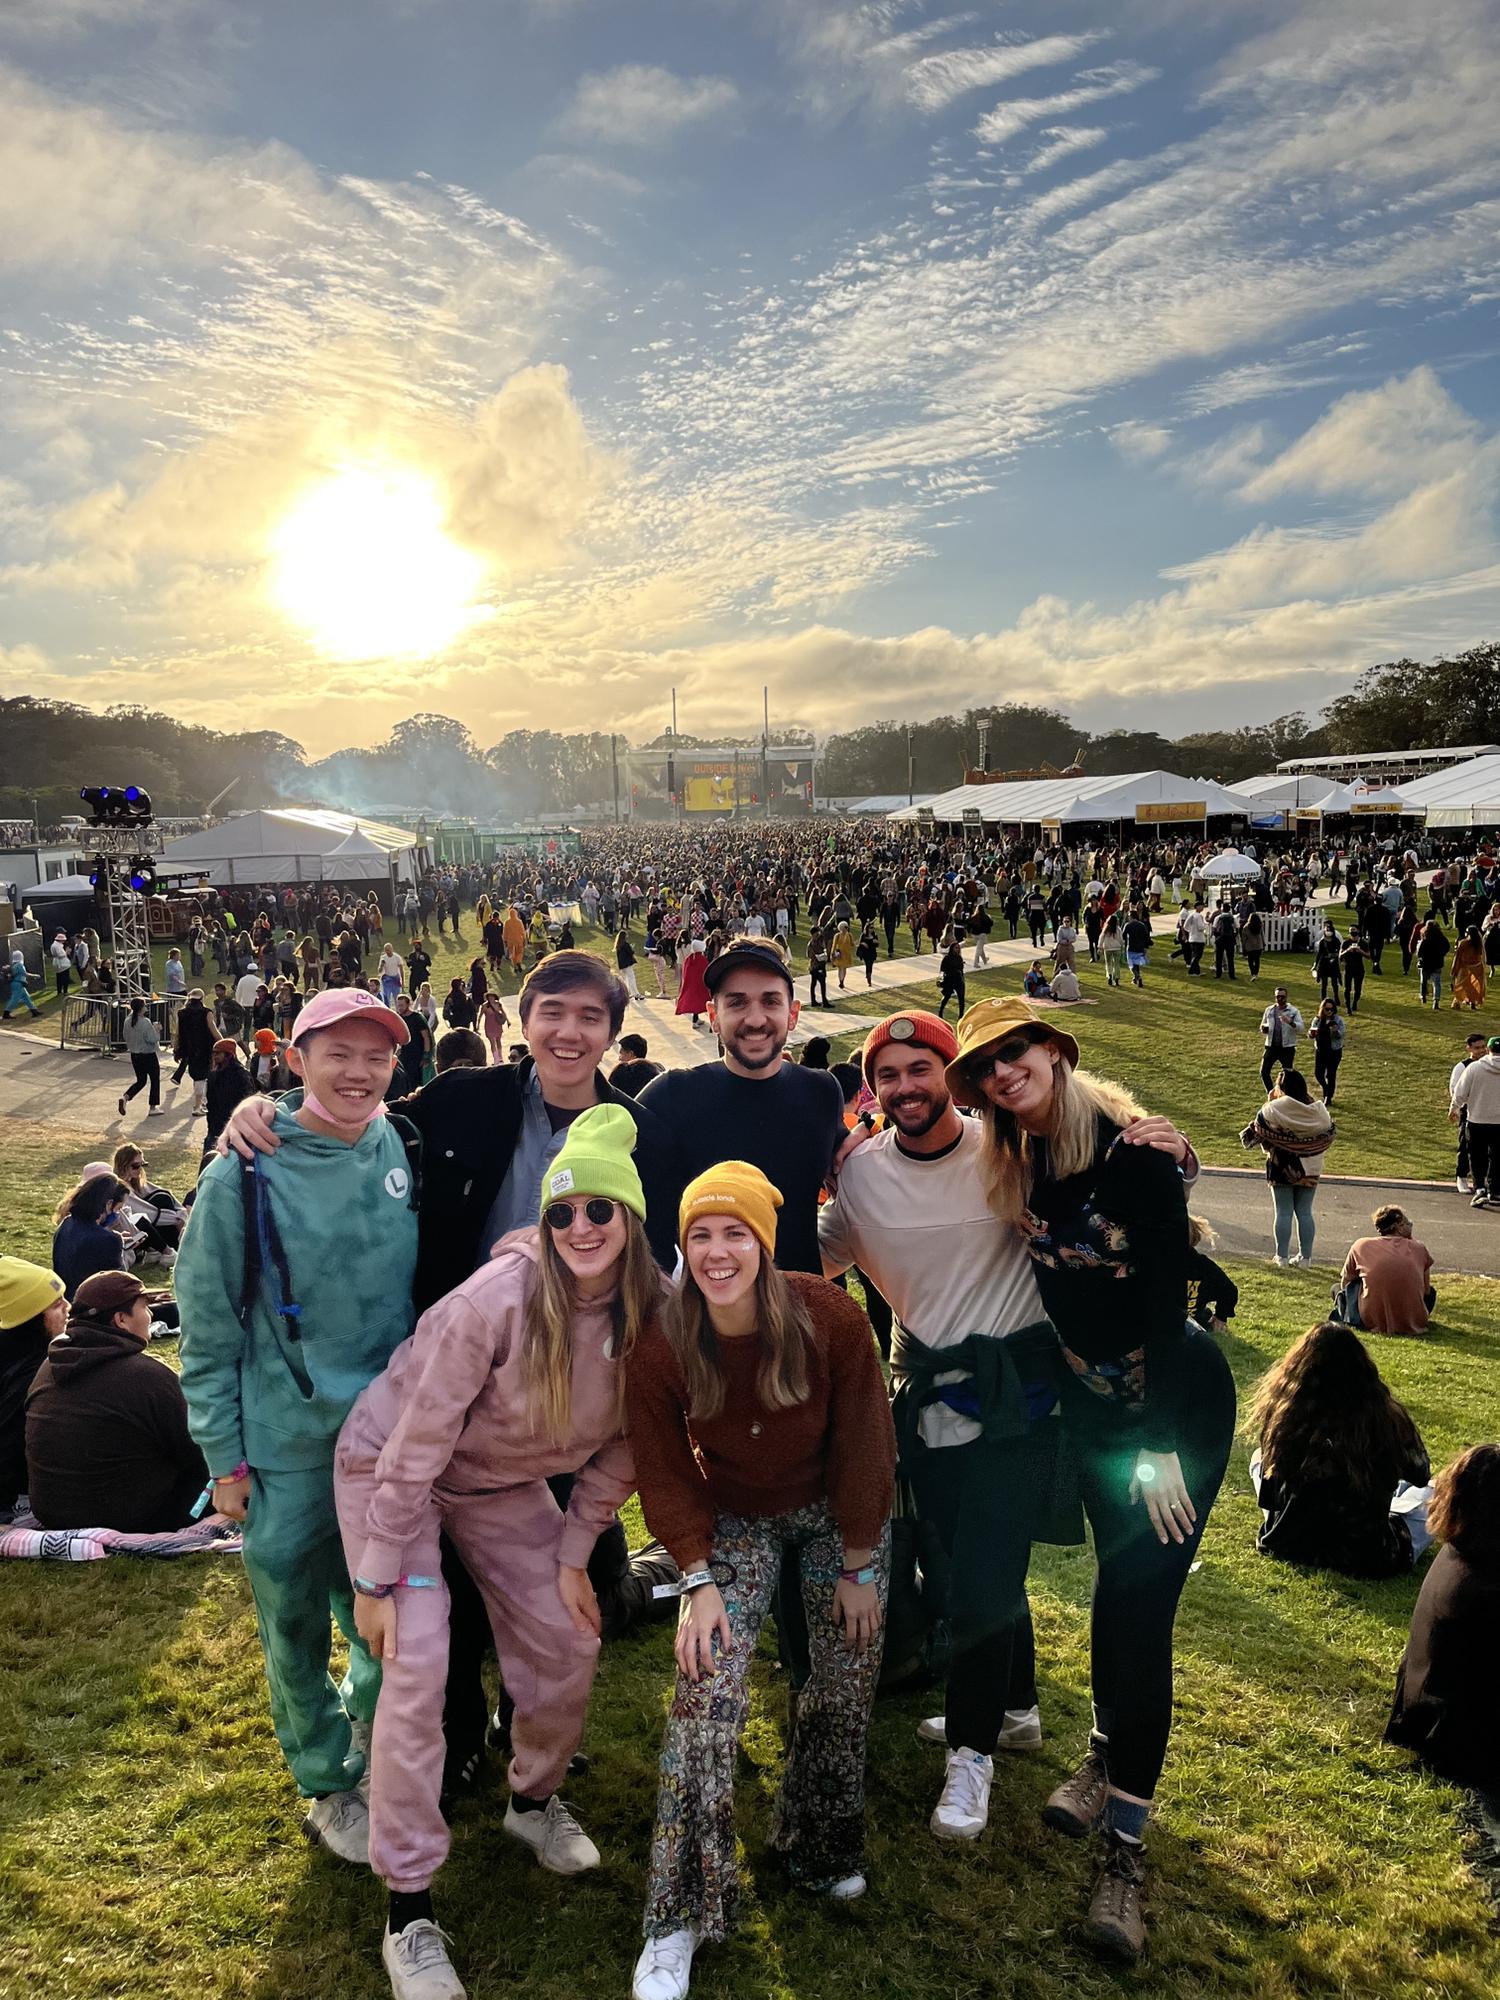 Some of our besties at Outsidelands!